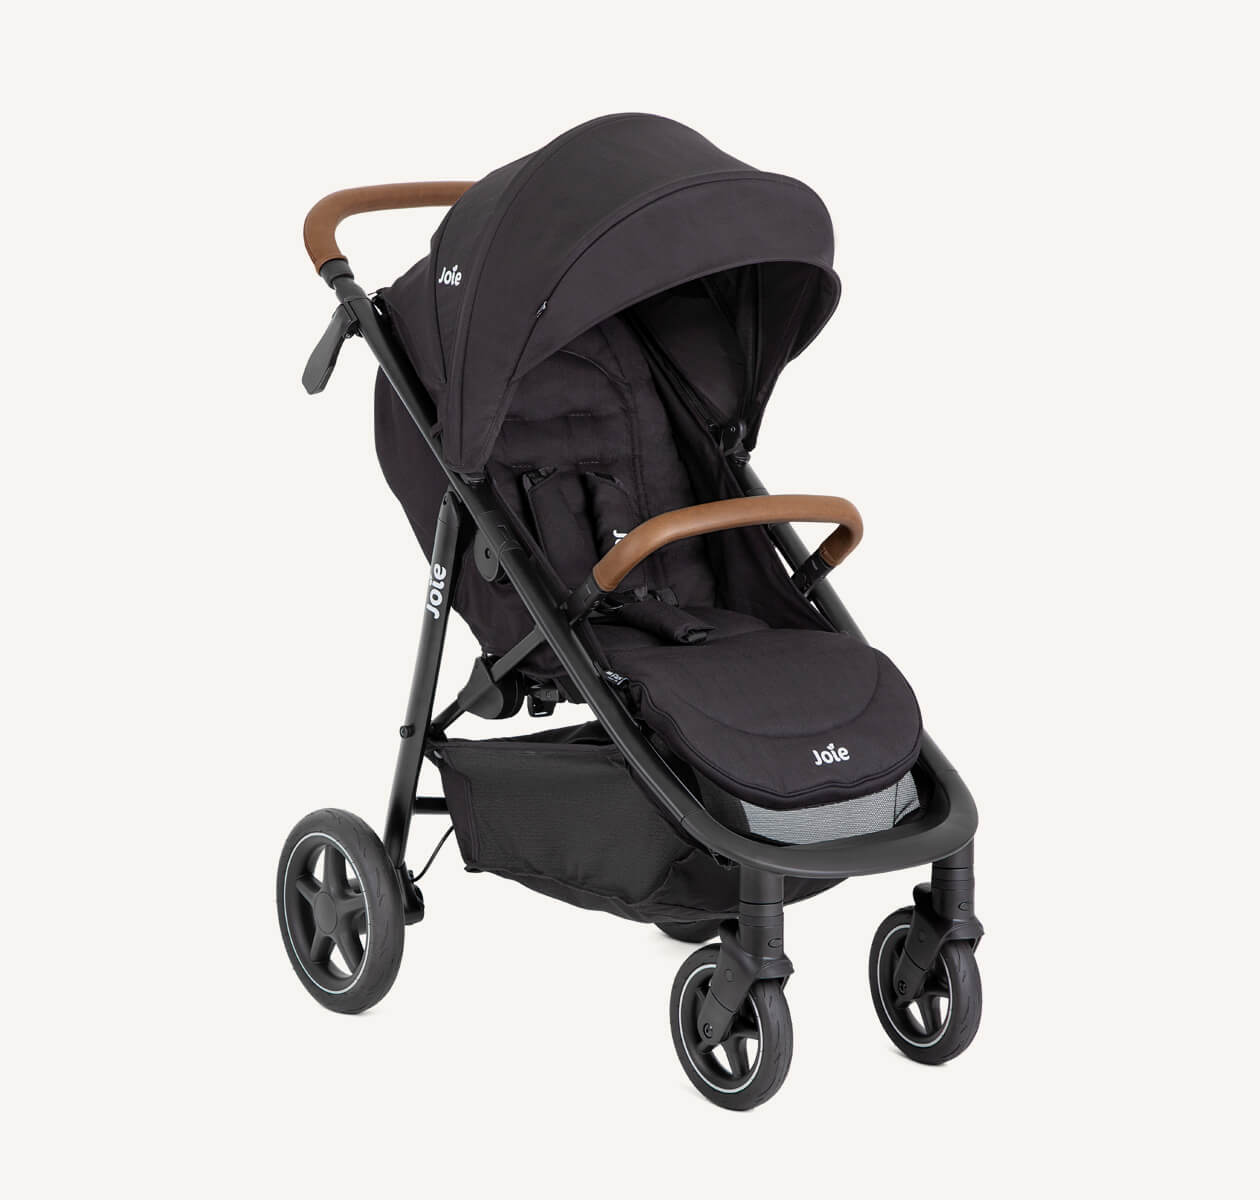 Black Joie mytrax pro stroller at a 45 degree angle.  